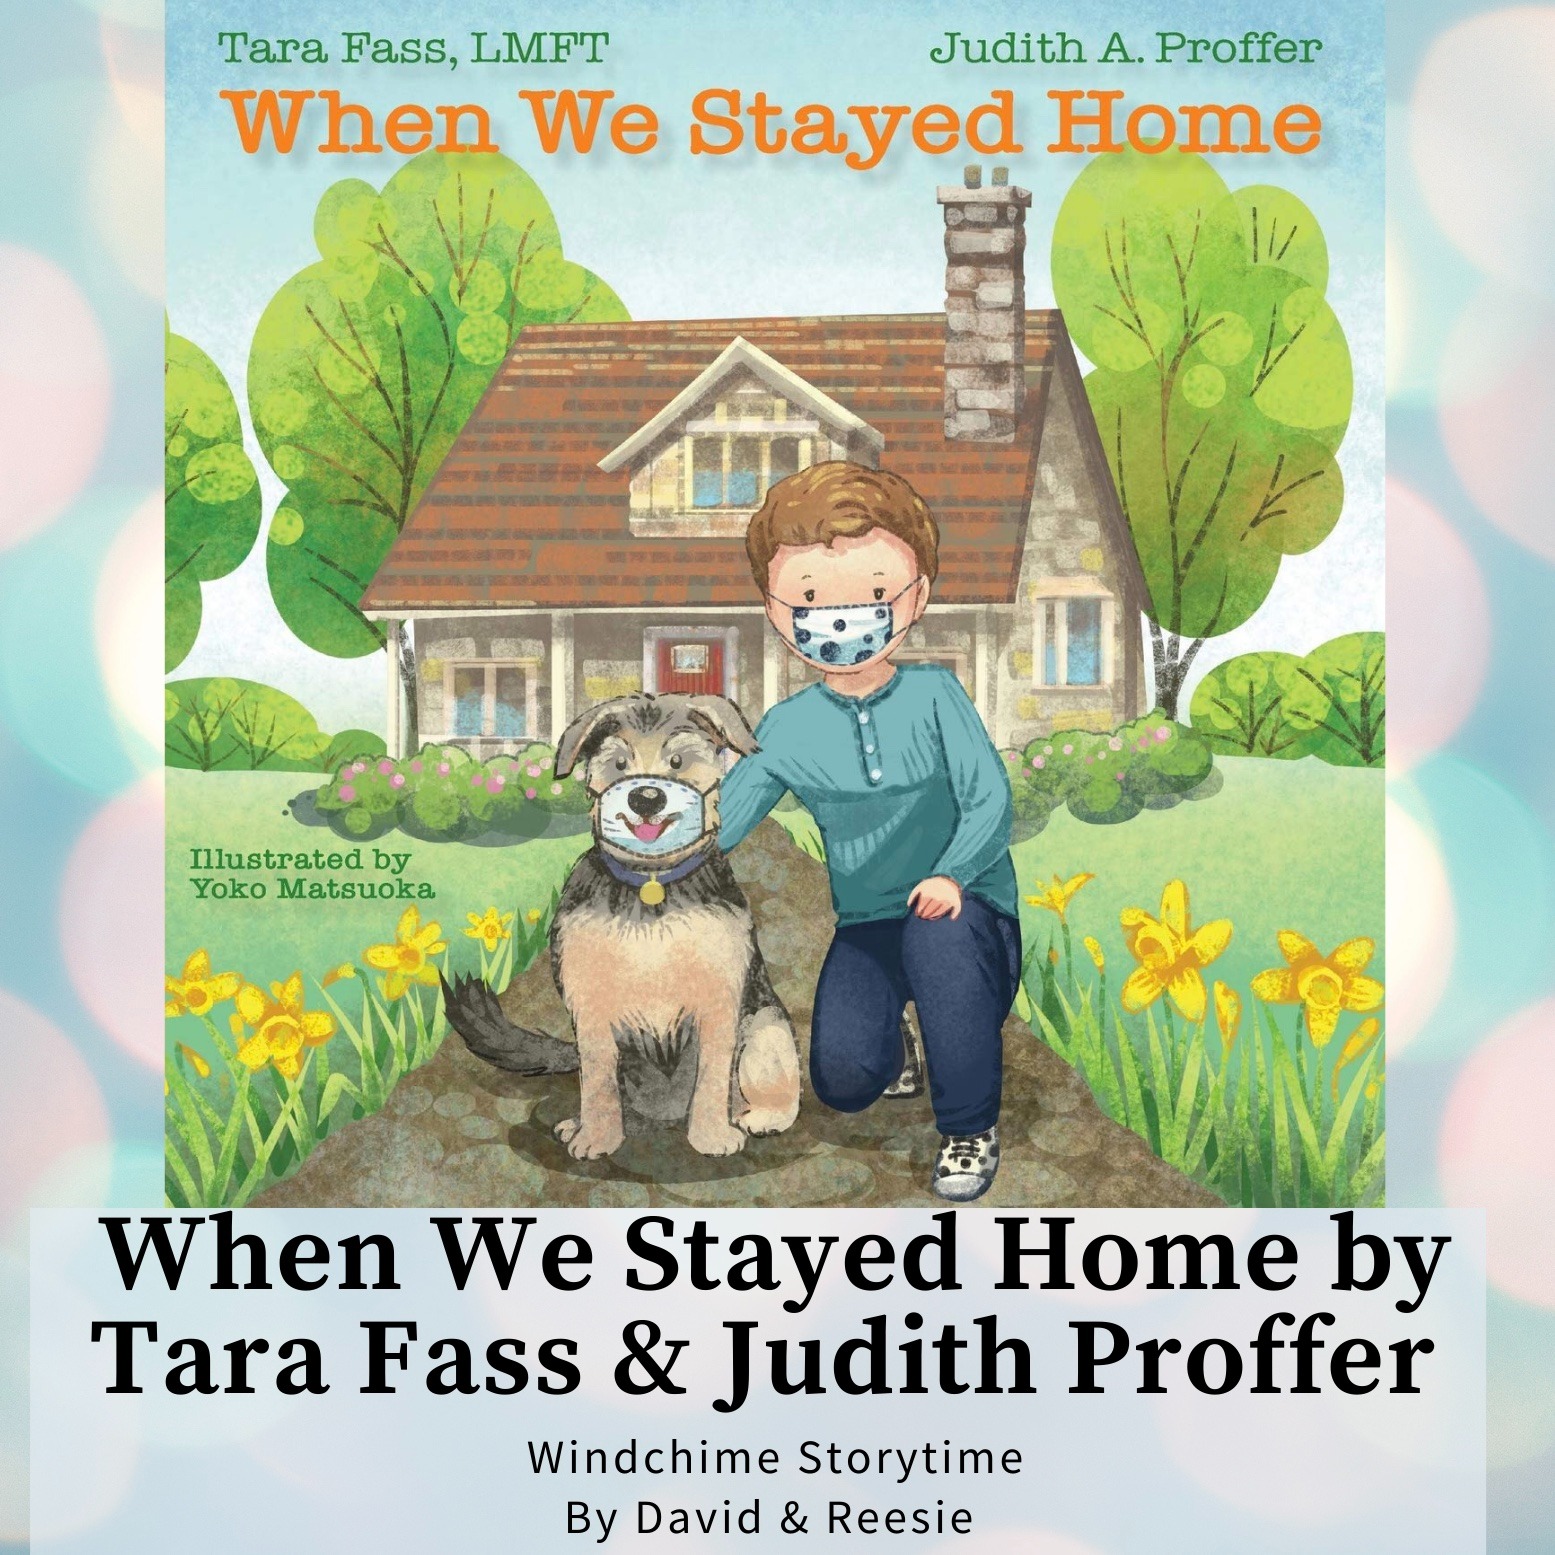 18- When We Stayed Home by Tara Fass and Judith Proffer